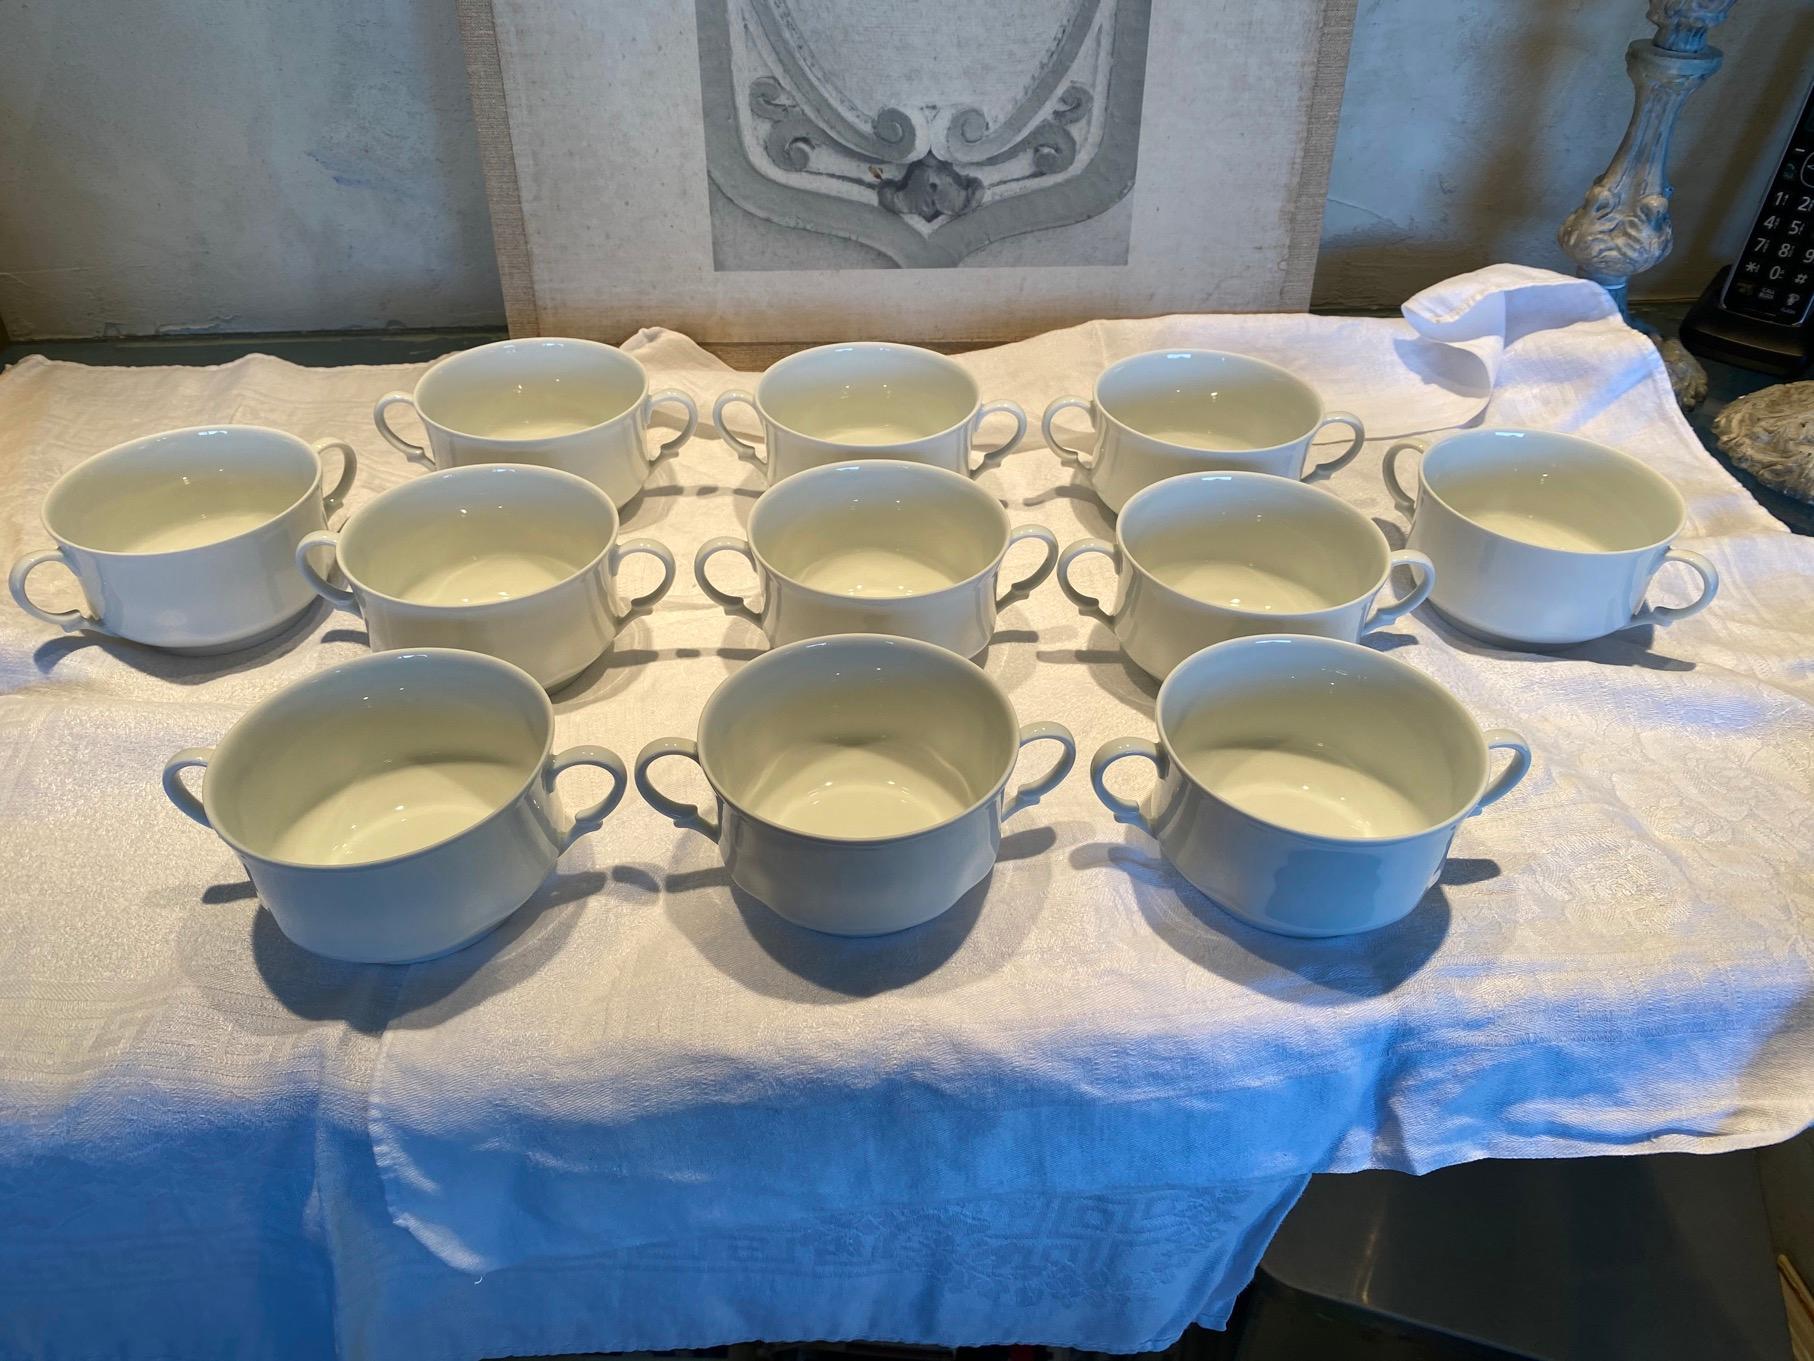 Fine bone china by Limoges of France. White consommé or soup cup with handles will bring elegance to any setting. Cup measures: 4